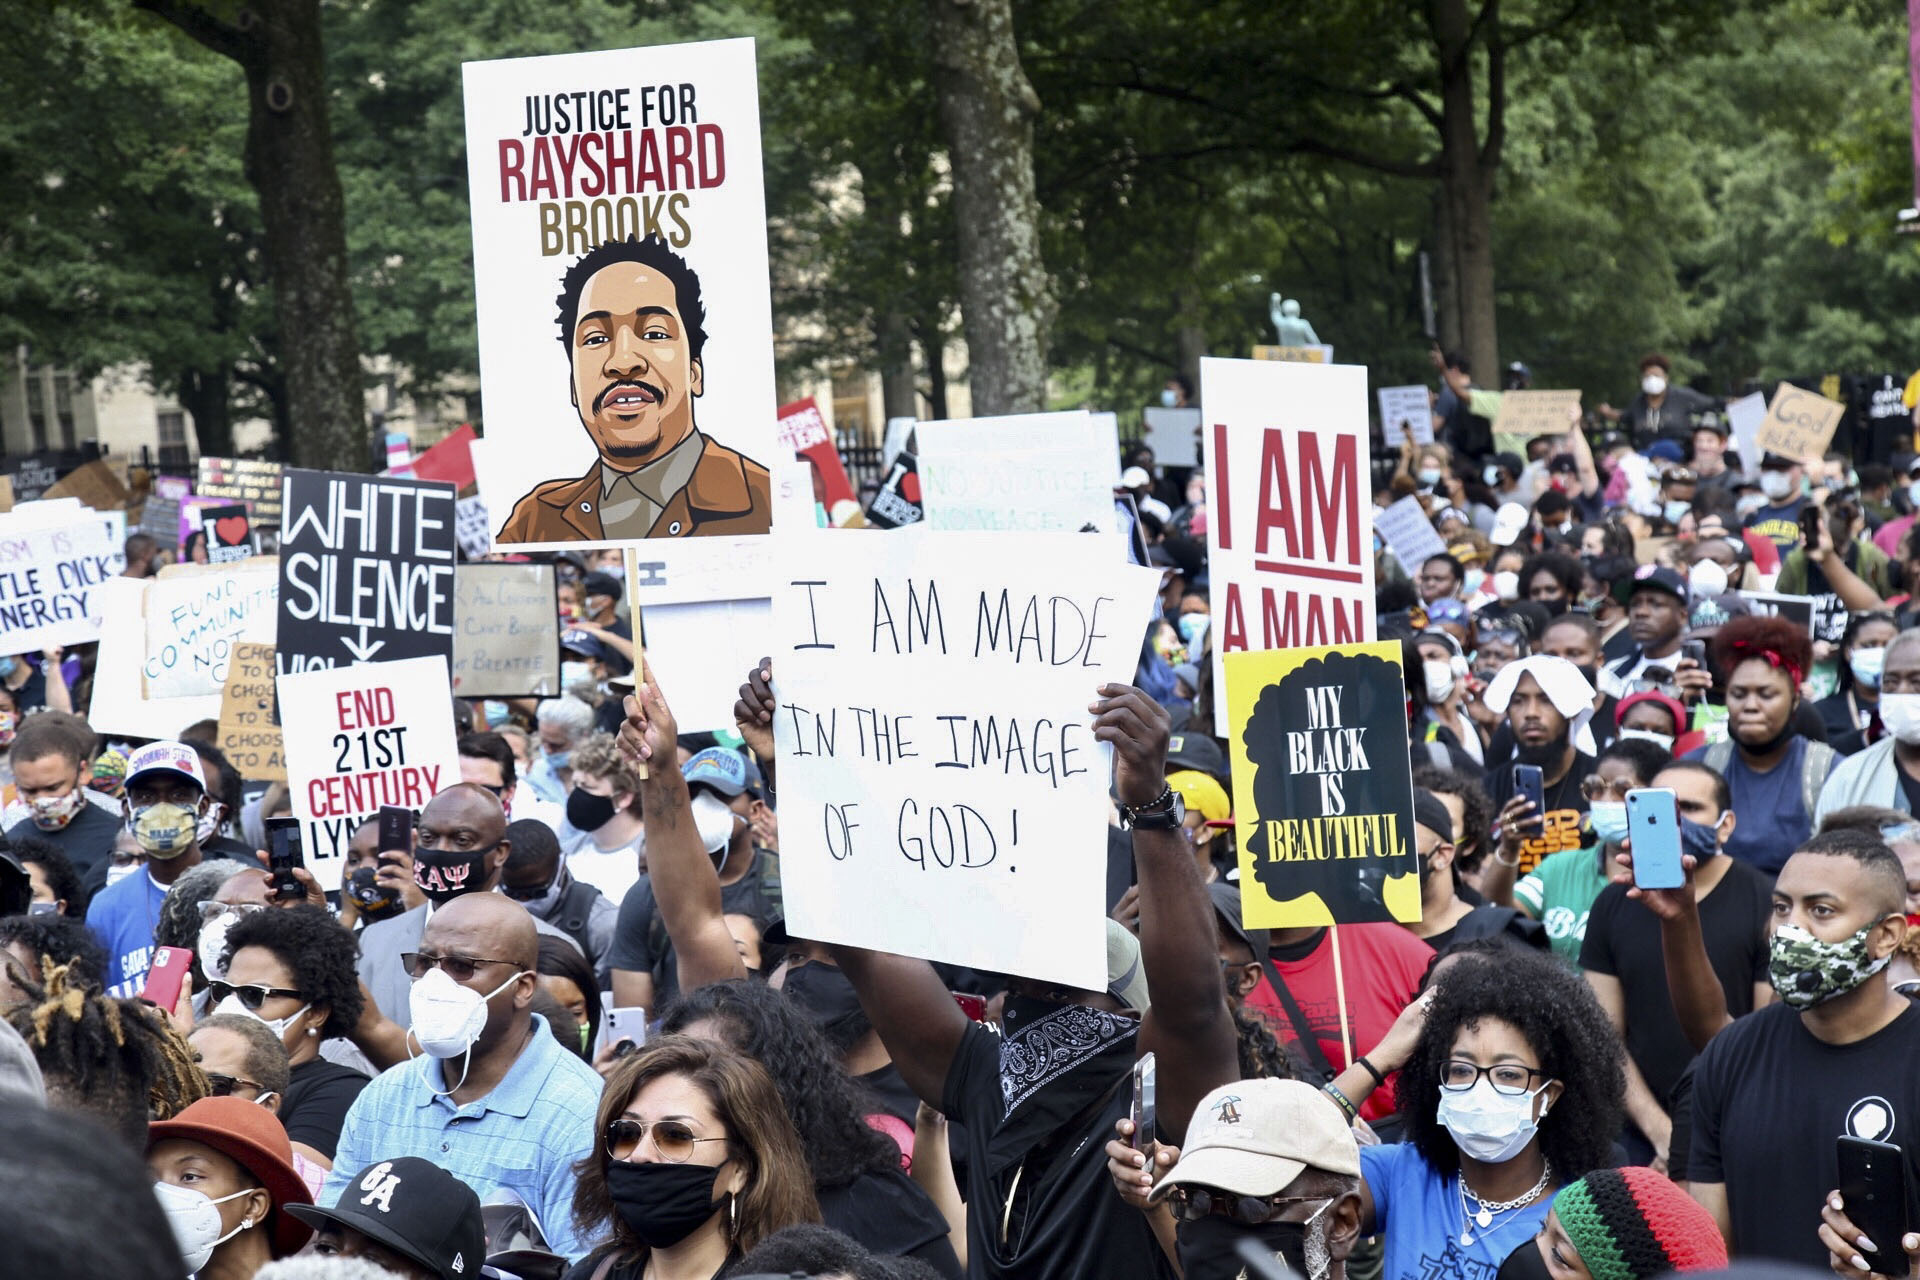 A crowd of demonstrators march to the Capitol Monday, June 15, 2020 in Atlanta. The NAACP March to the Capitol coincided with the restart of the Georgia 2020 General Assembly. Lawmakers returned wearing masks and followed new rules to restart the session during the pandemic. Photo: AP